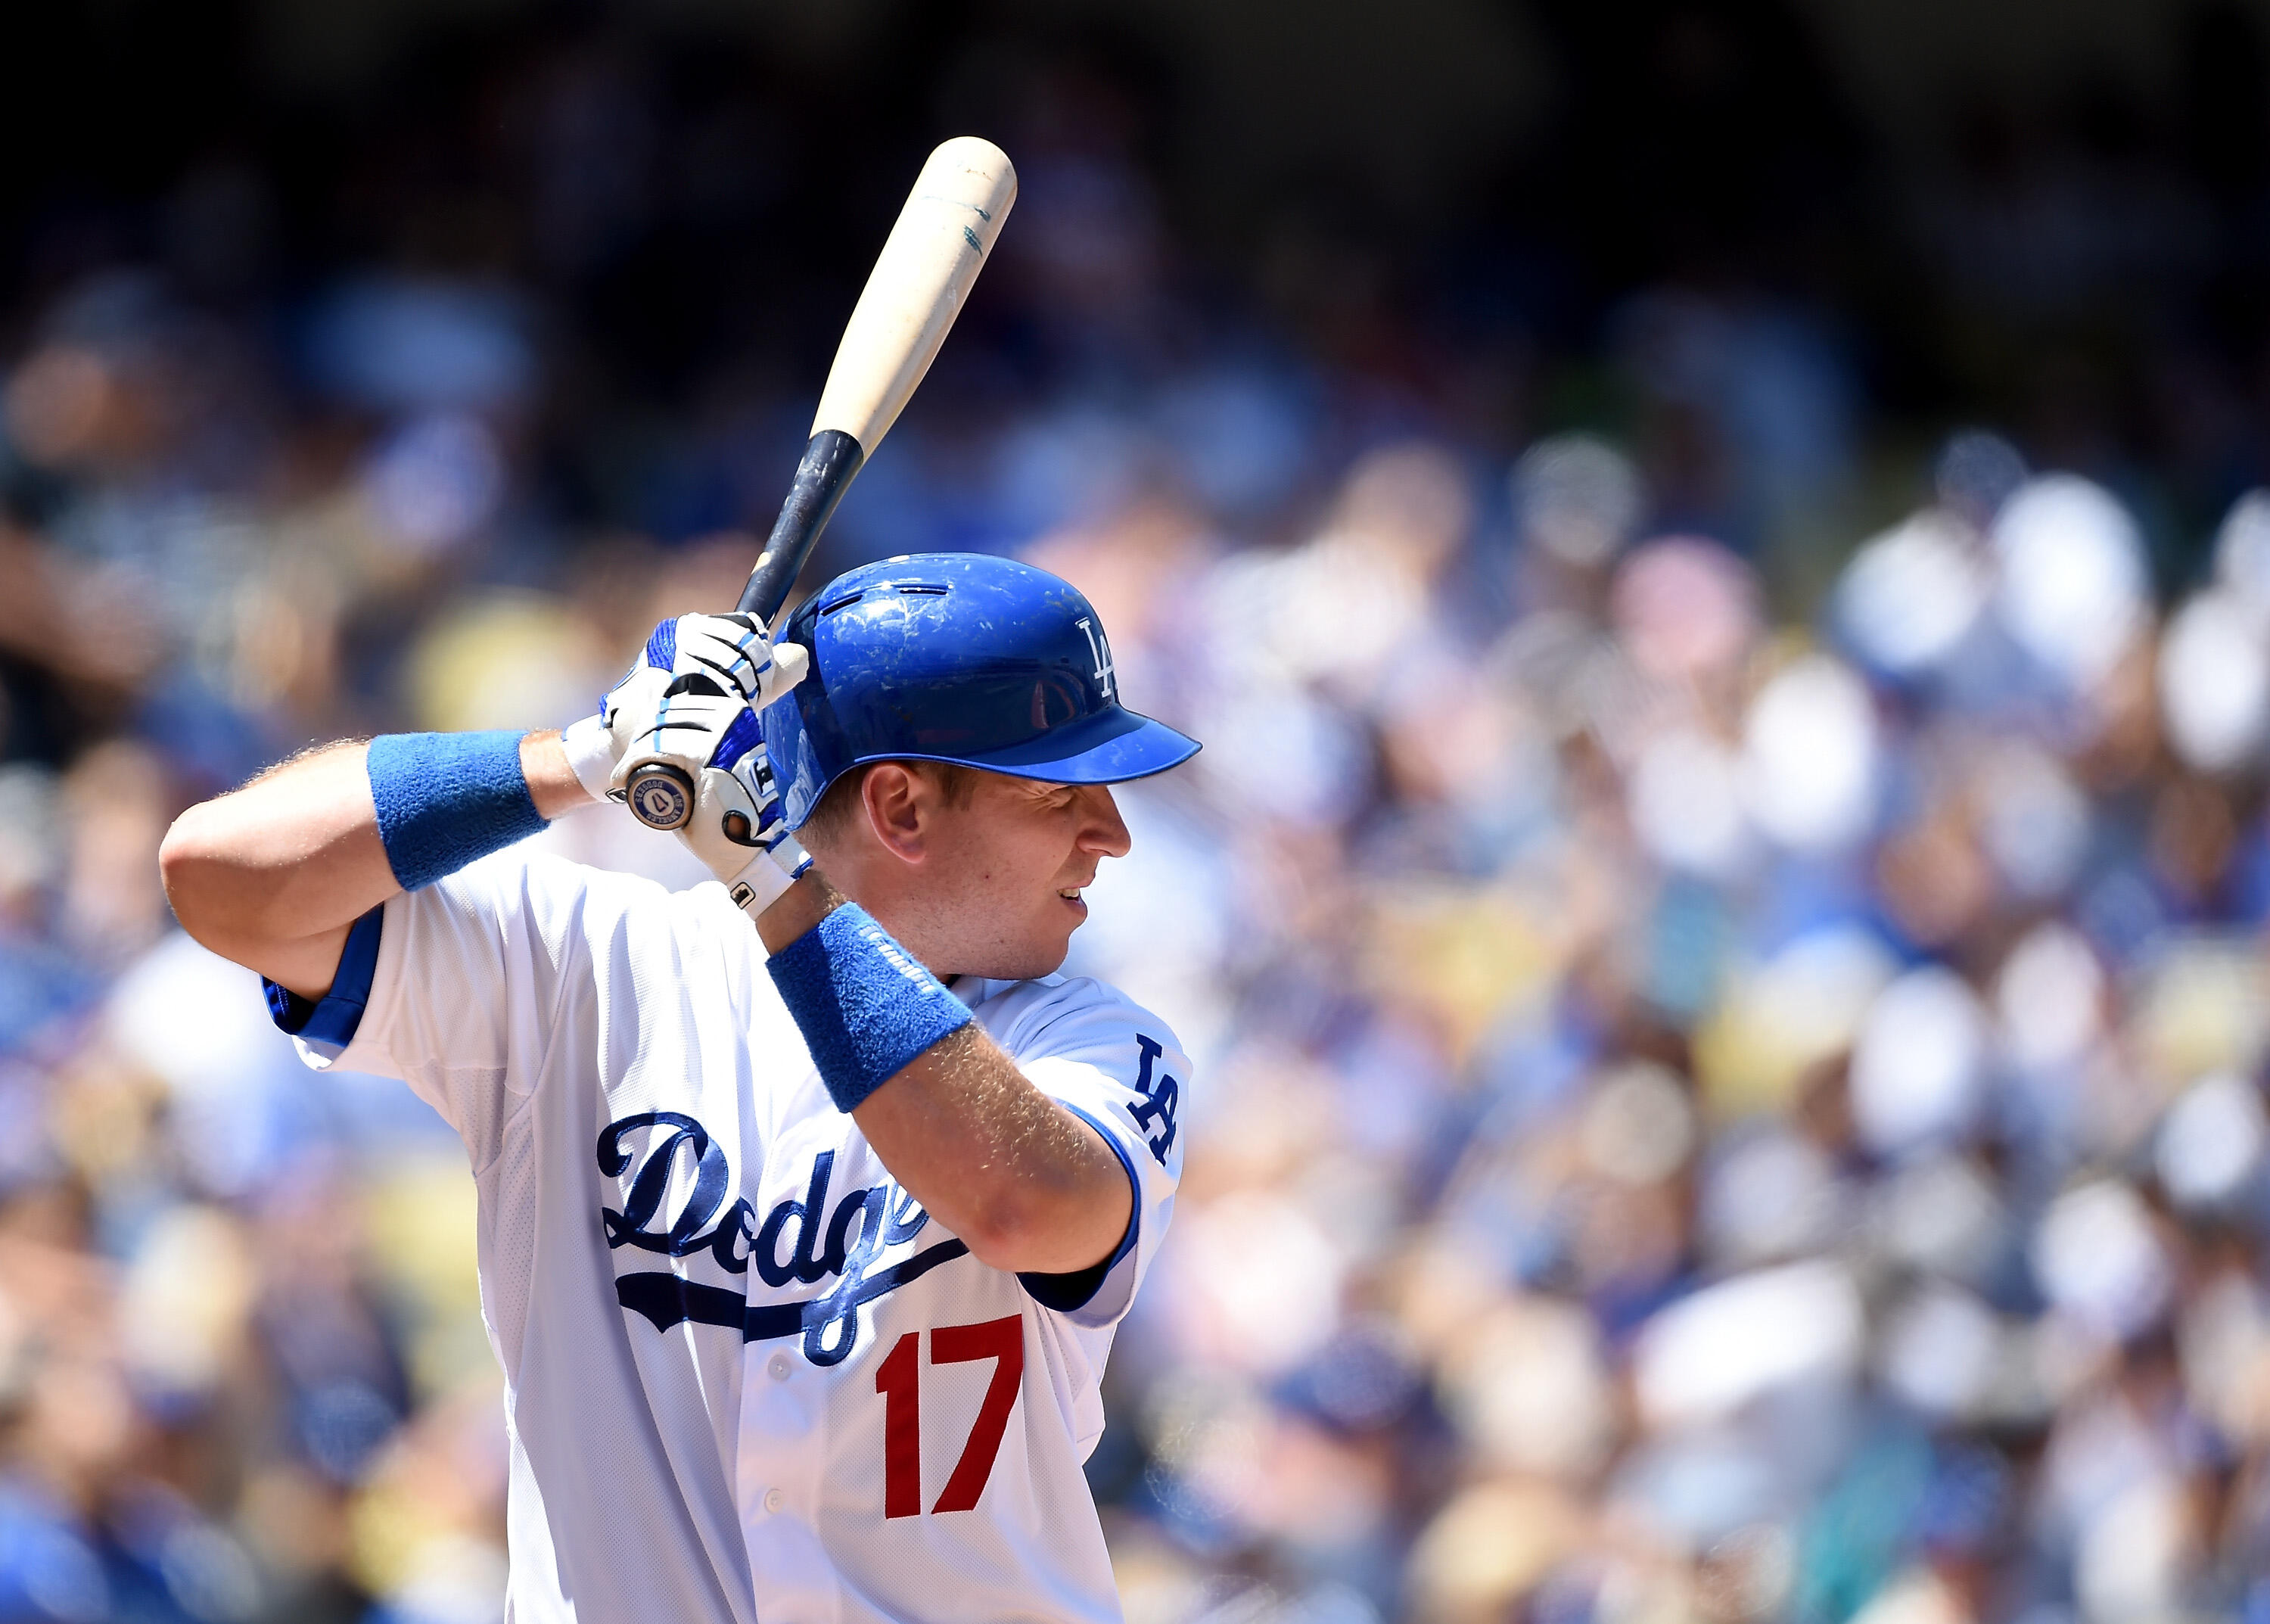 LOS ANGELES, CA - APRIL 19:  A.J. Ellis #17 of the Los Angeles Dodgers at bat during a 7-0 win over the Colorado Rockies at Dodger Stadium on April 19, 2015 in Los Angeles, California.  (Photo by Harry How/Getty Images)